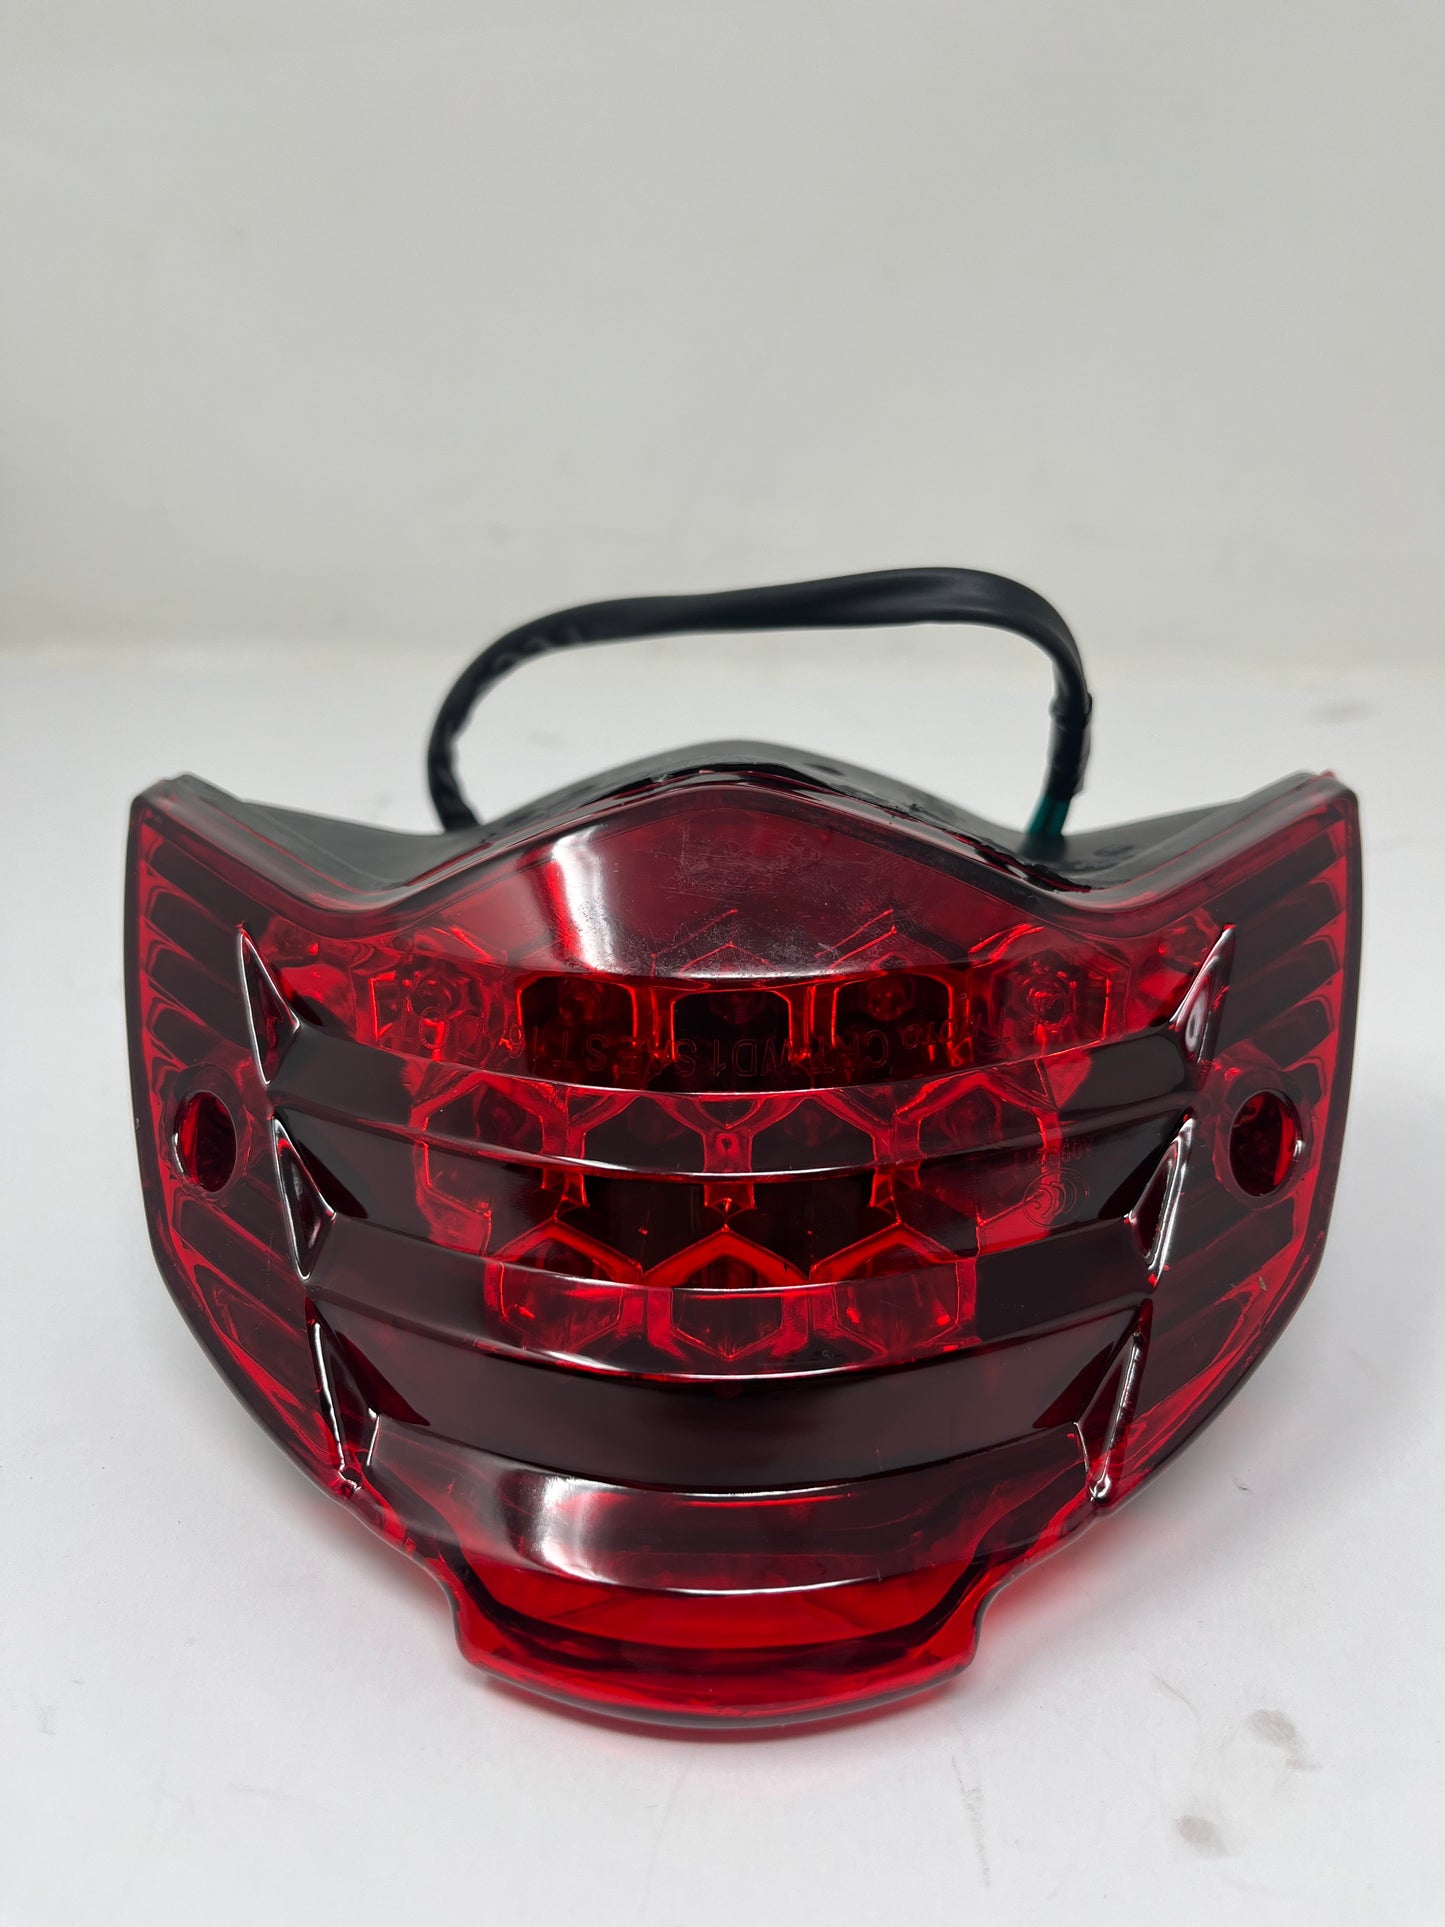 Taillight for DF250RTS for sale. Buy Venom X22R taillight part.